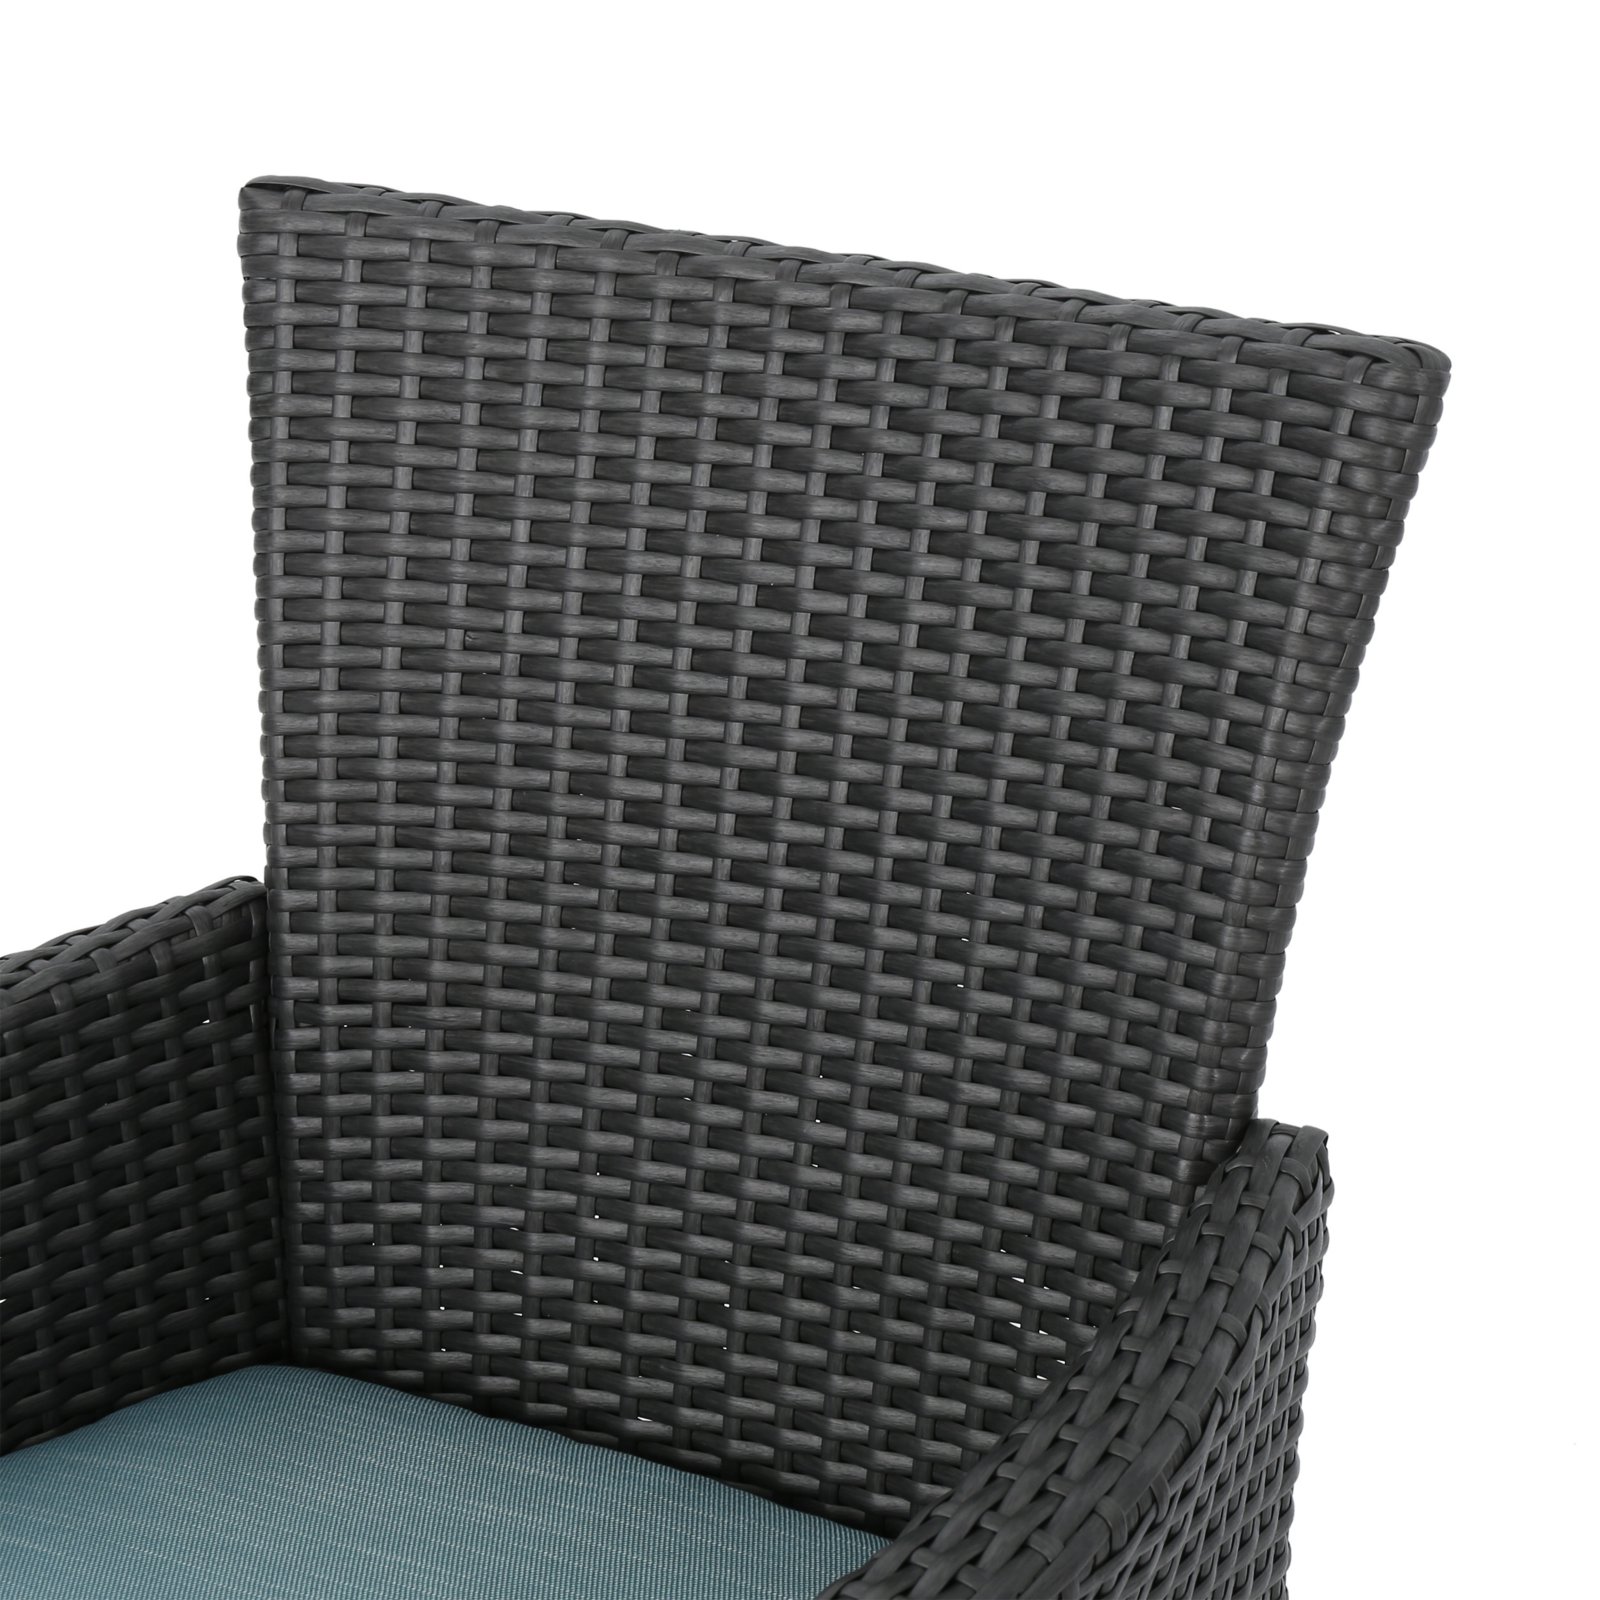 Curtis Outdoor Wicker Dining Chairs with Water Resistant Cushions - Set of 2 - image 4 of 11